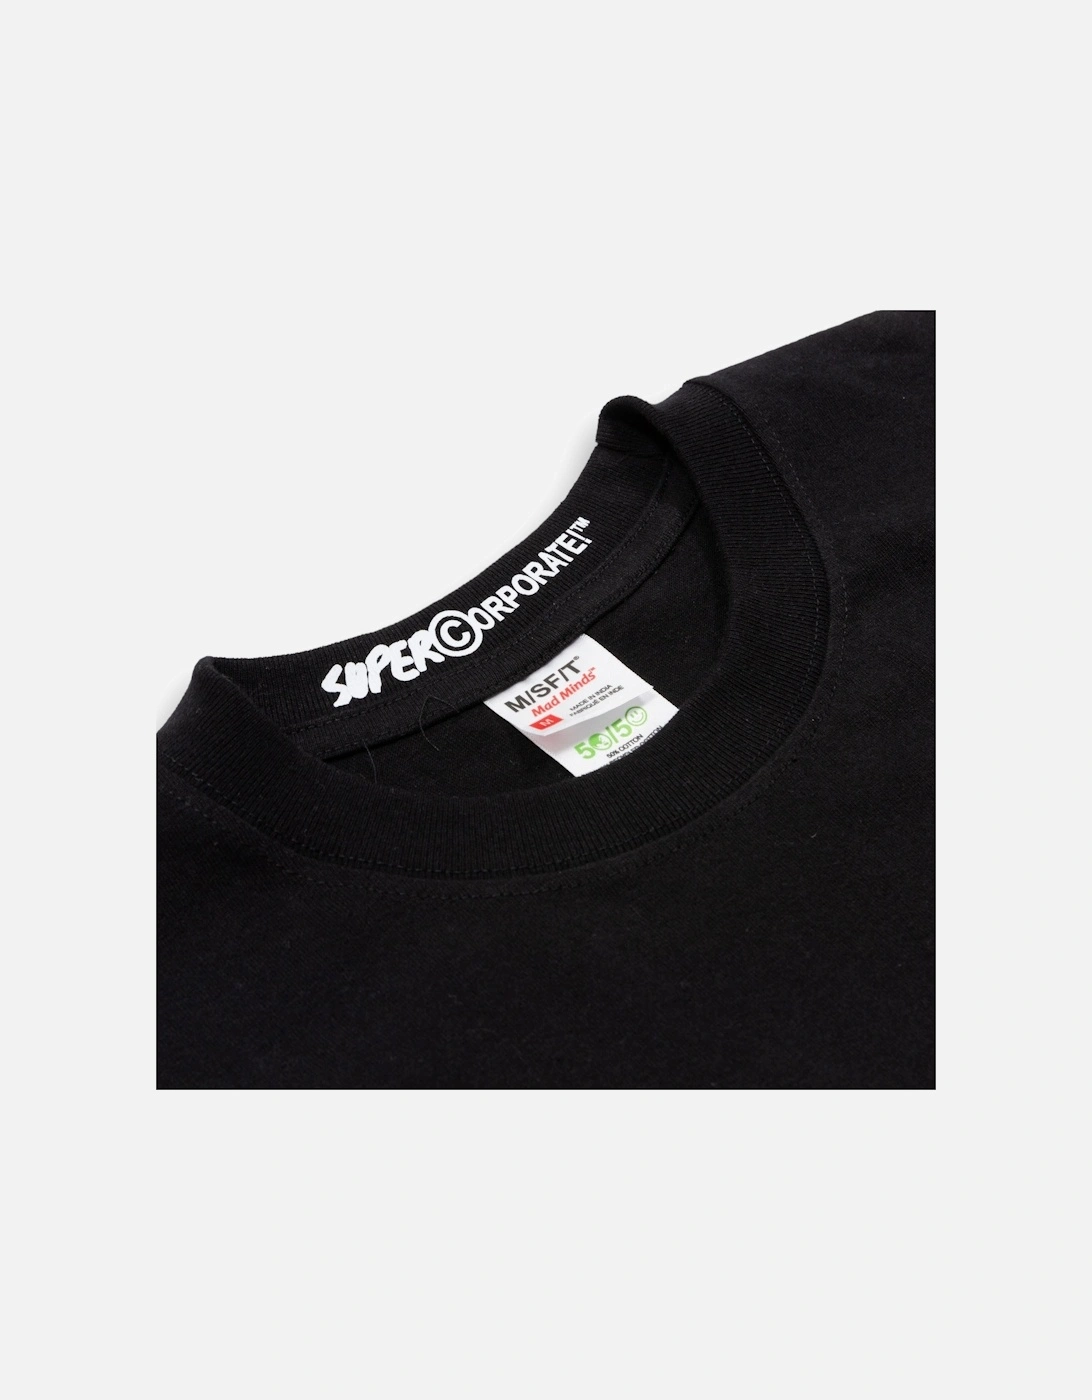 Supercorporate 2.0 T-Shirt - Washed Black